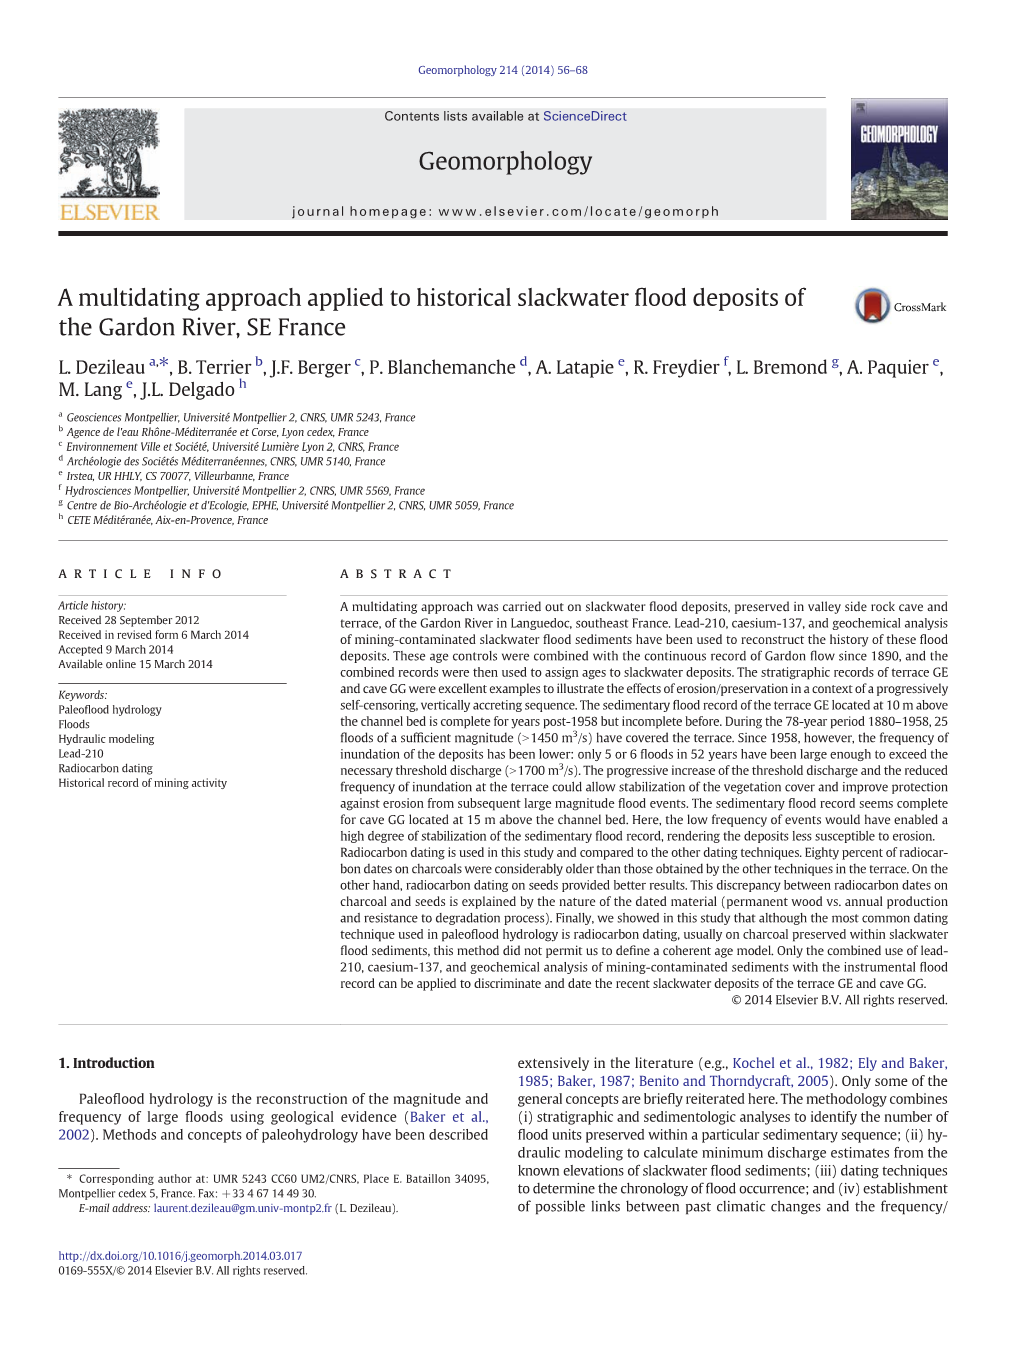 A Multidating Approach Applied to Historical Slackwater ﬂood Deposits of the Gardon River, SE France